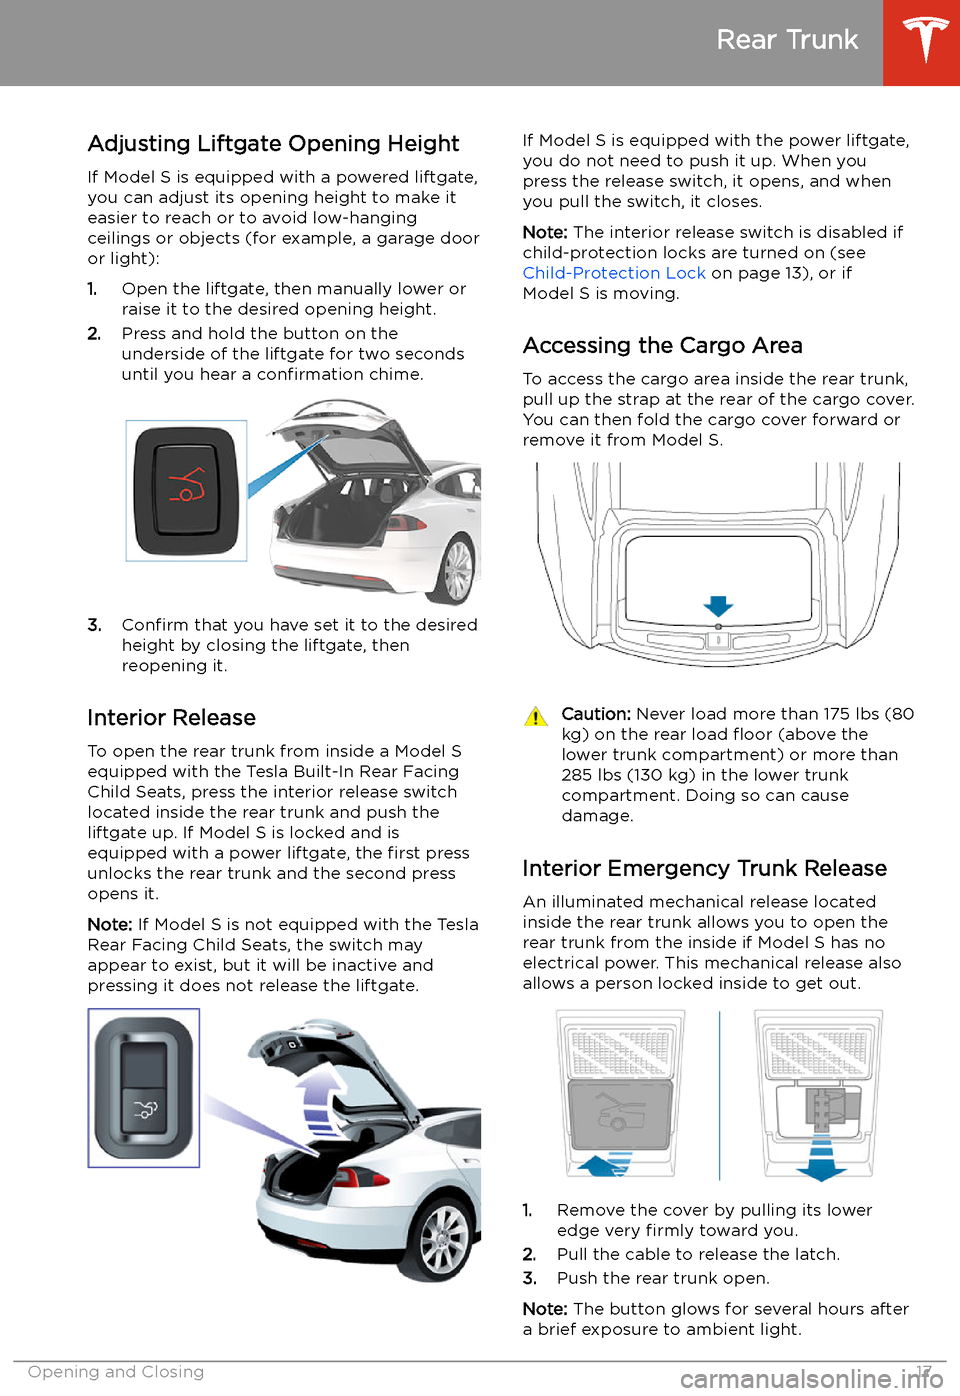 TESLA MODEL S 2020  Owners Manual Adjusting Liftgate Opening HeightIf Model S is equipped with a powered liftgate,
you can adjust its opening height to make it
easier to reach or to avoid low-hanging
ceilings or objects (for example, 